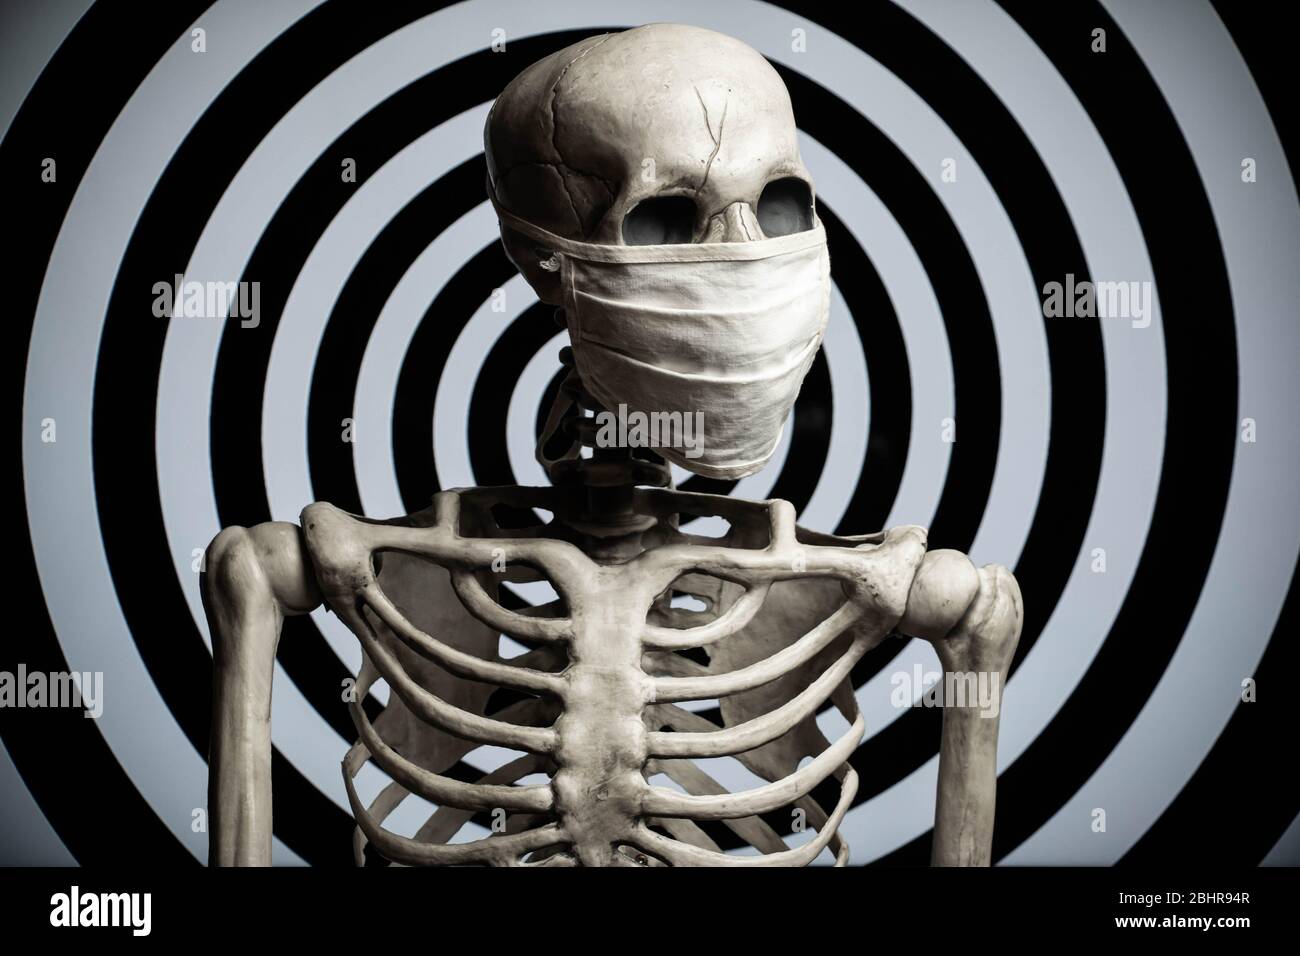 A skeleton wearing a cloth medical face mask in front of a hypnotic spiral background. Conspiracy or confusion over the covid-19 coronavirus pandemic. Stock Photo